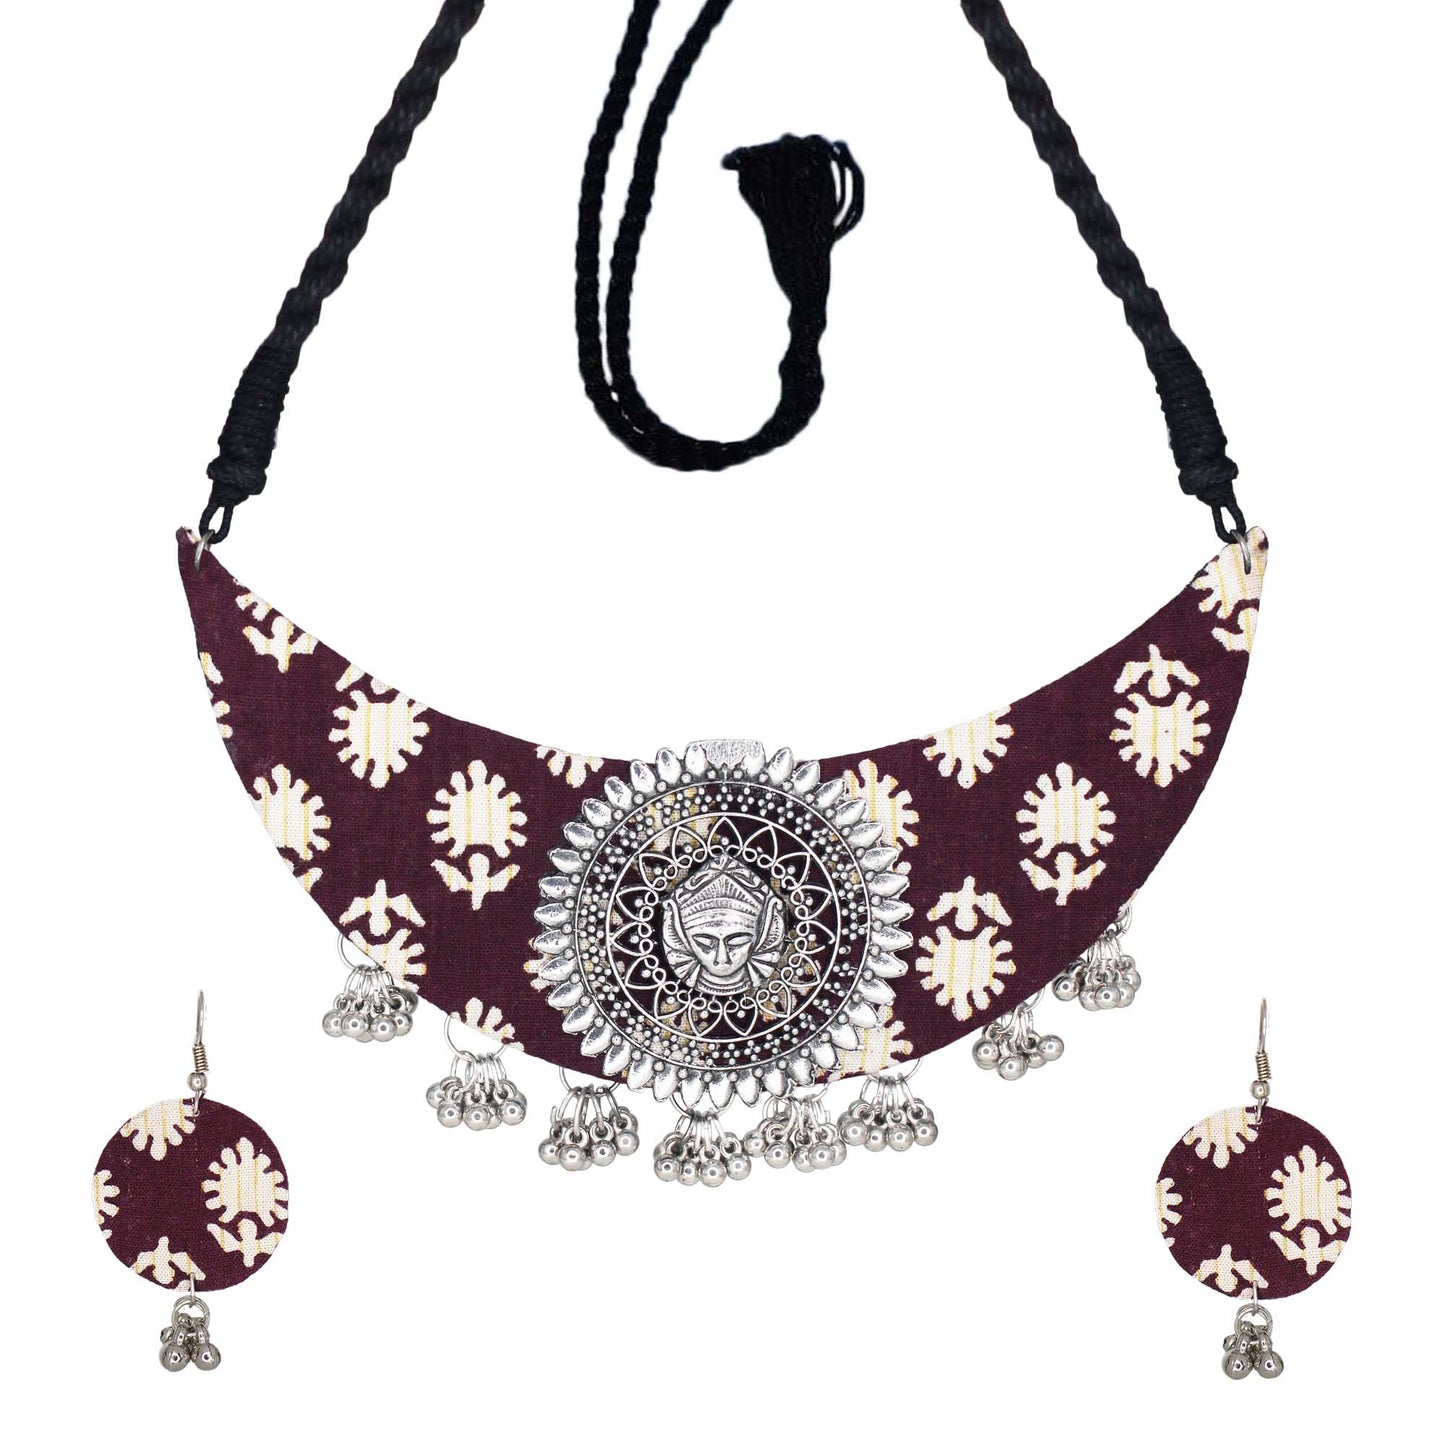 Organic Vibes Handmade Floral Hand Block Printed Brown Fabric Necklace Set For Women